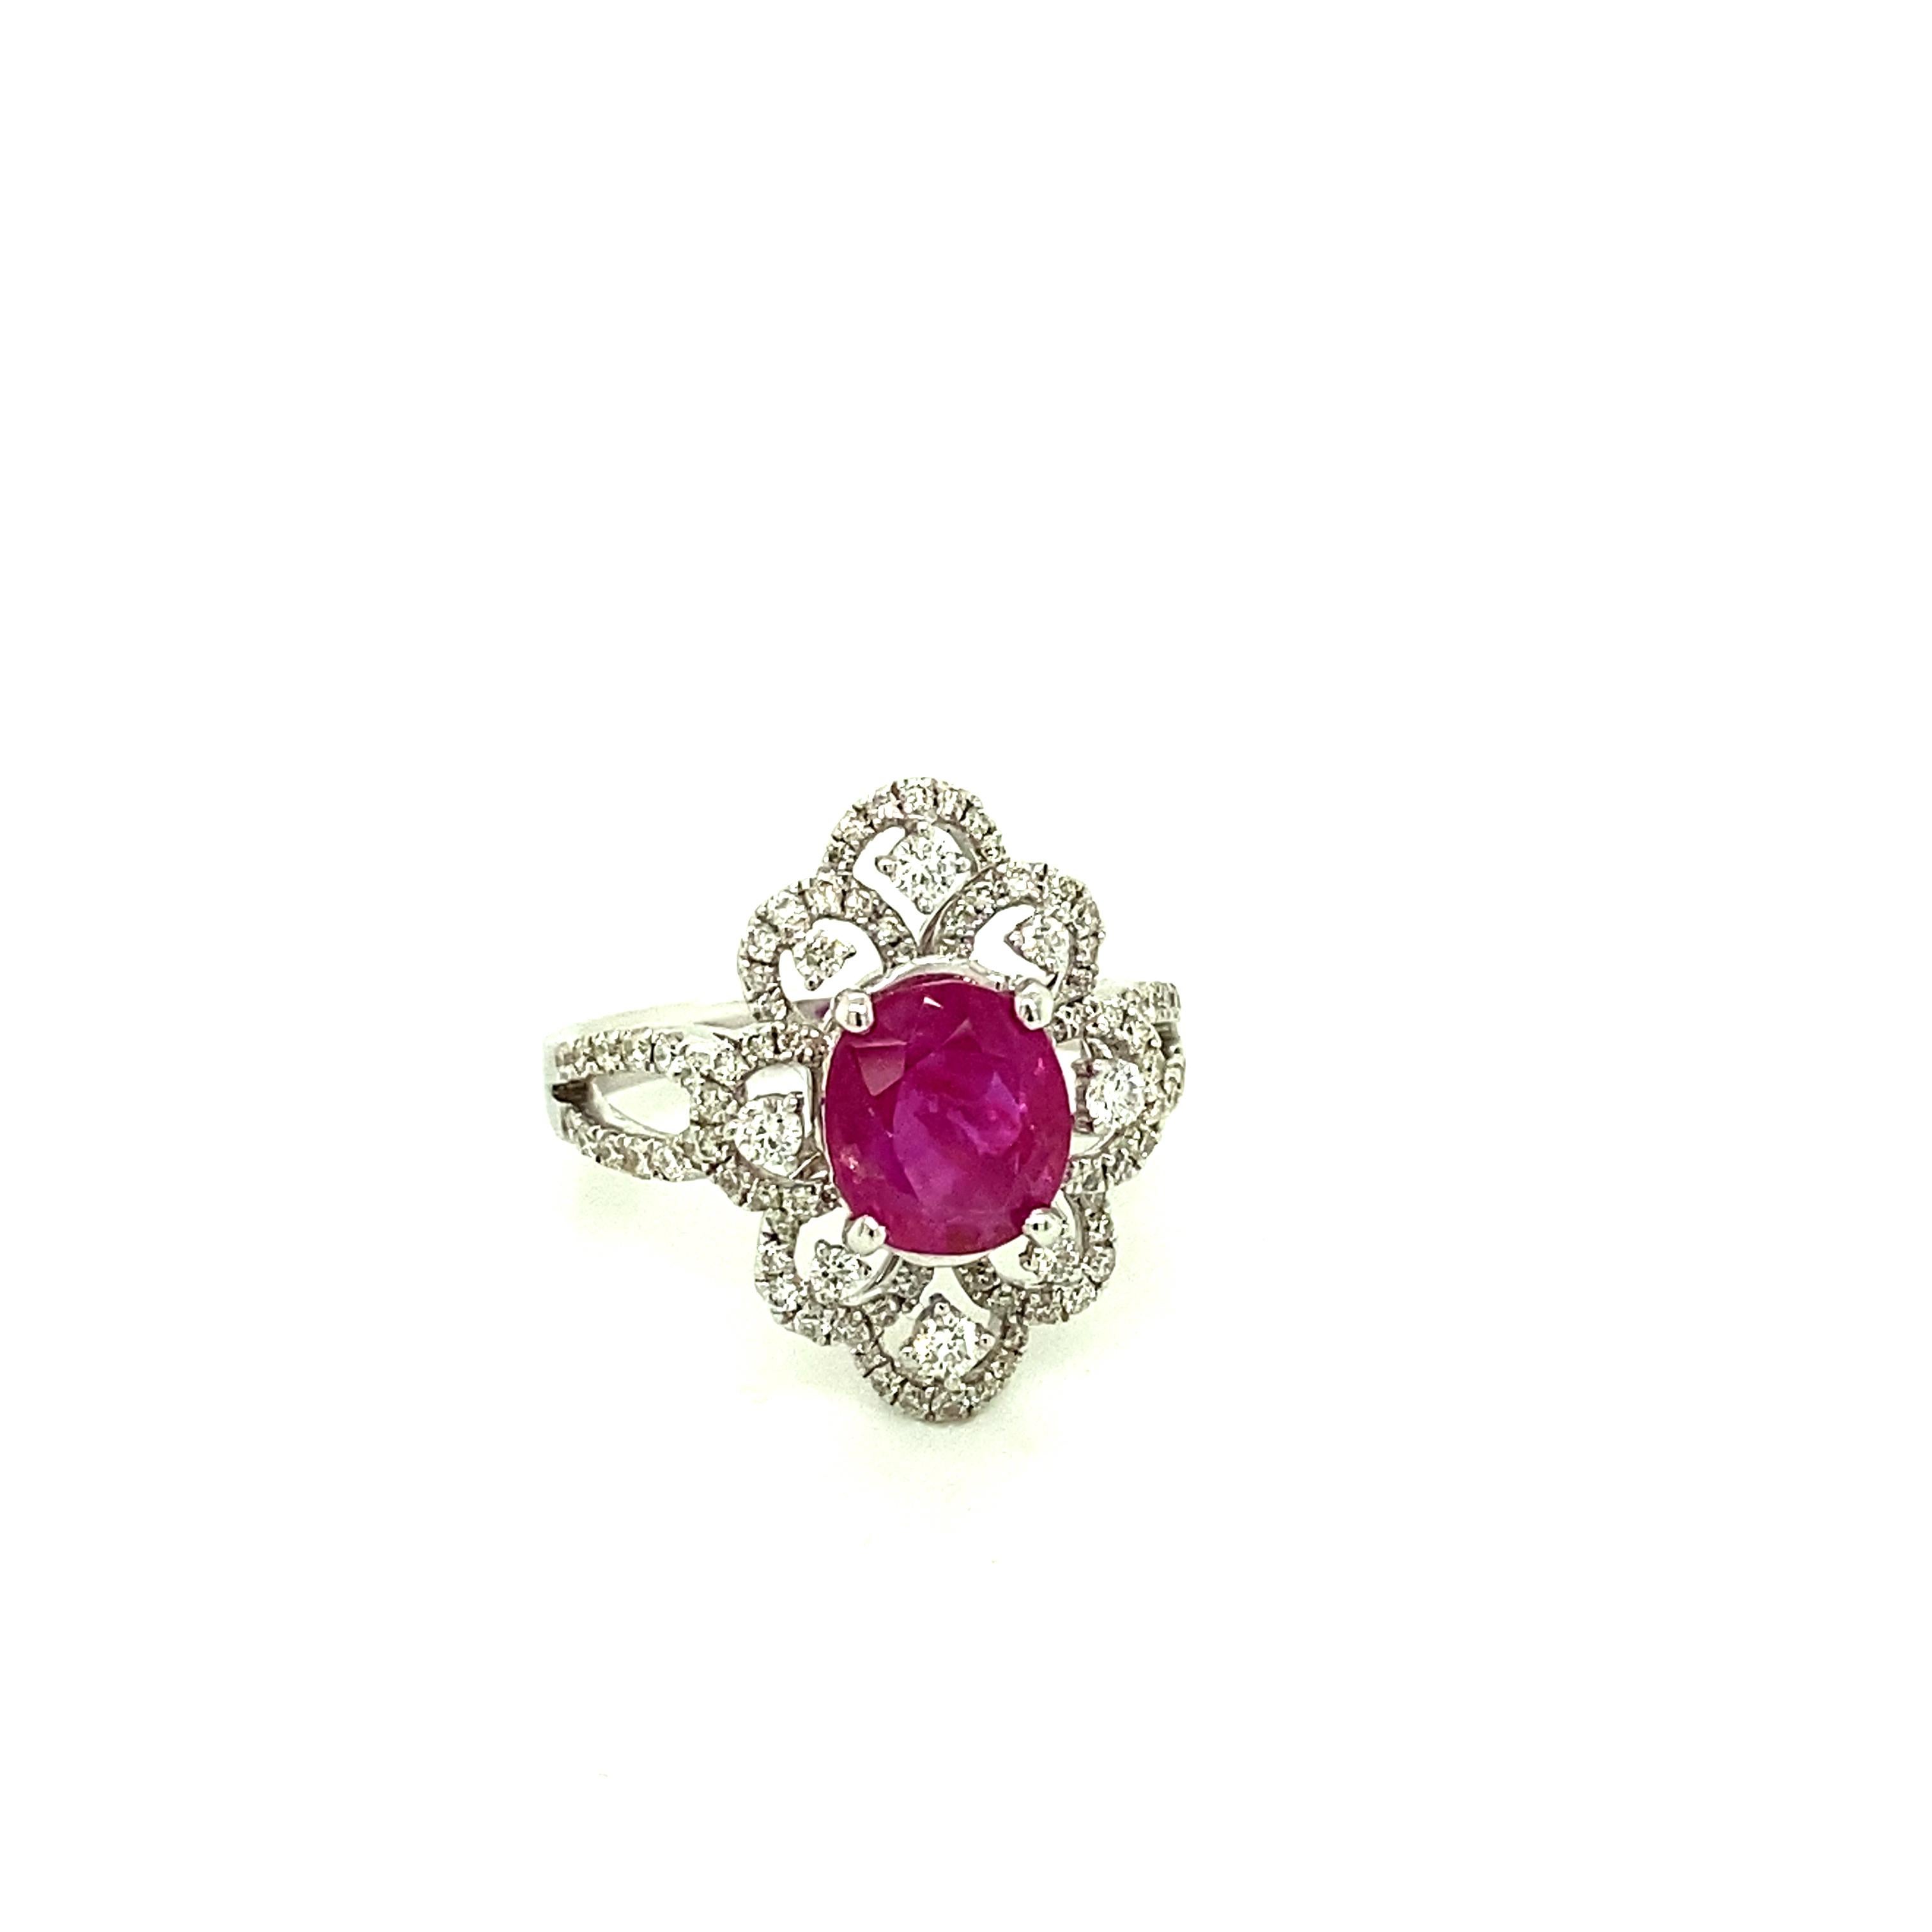 2.62 Carat GRS Certified Unheated Burmese Ruby and White Diamond Engagement Ring:

A rare ring, it features an elegant GRS certified oval-cut unheated natural Burmese red ruby weighing 2.62 carat, with white round brilliant diamonds diamonds